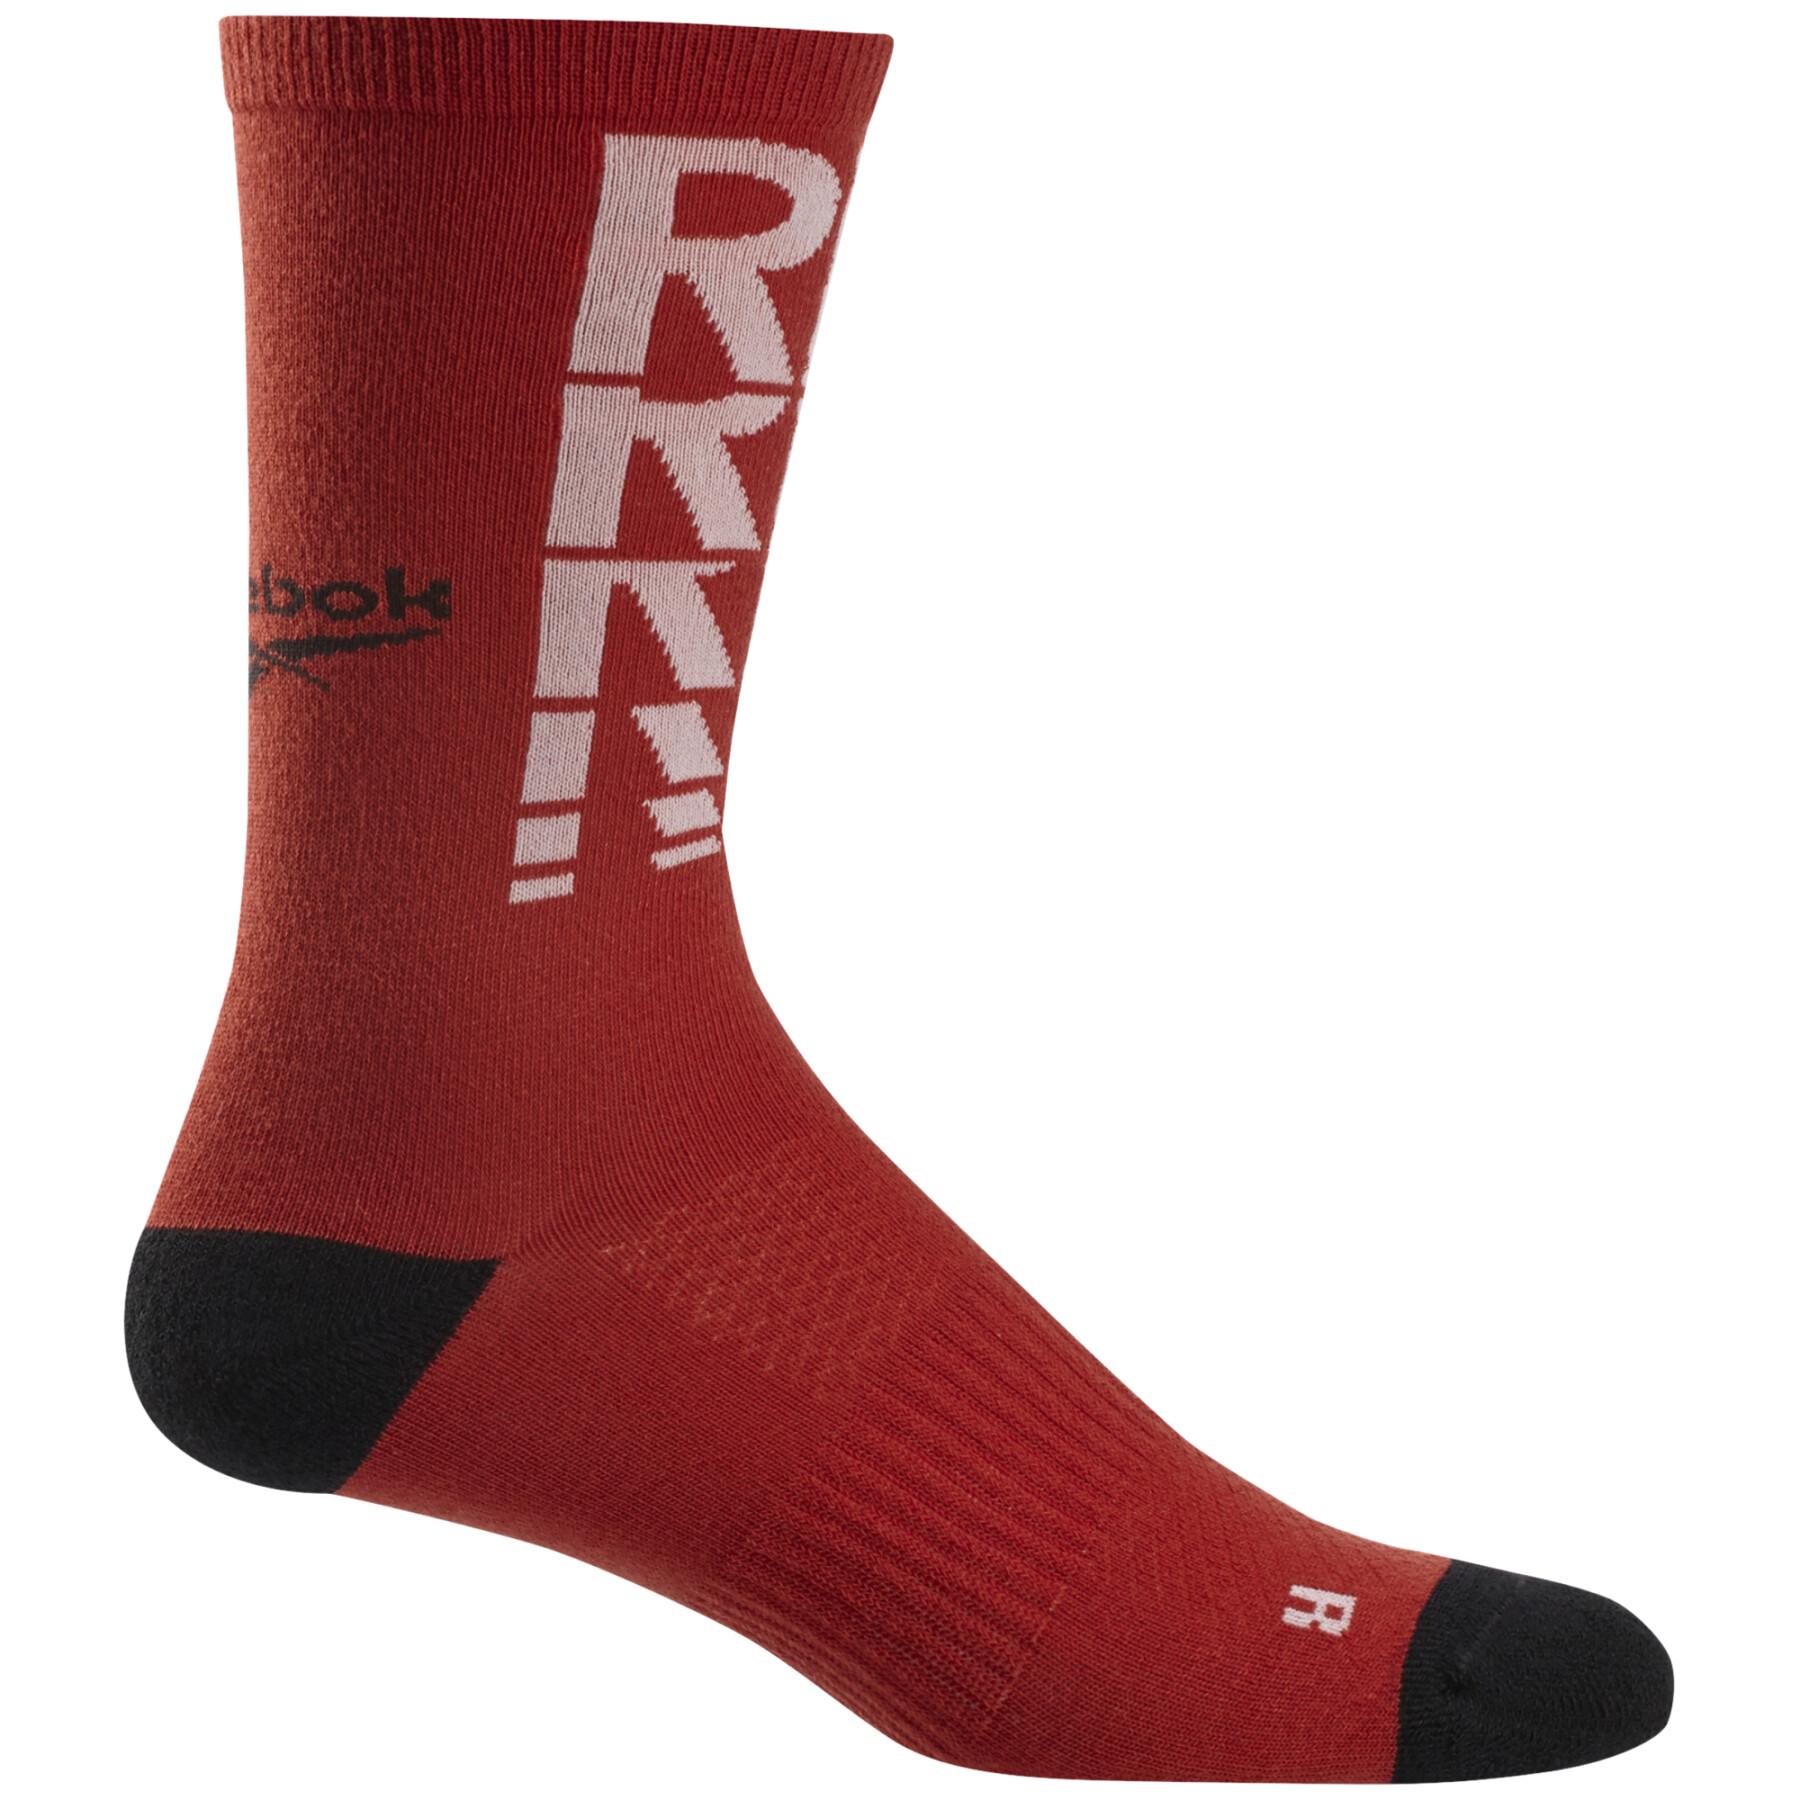 Chaussettes Reebok One Series Training